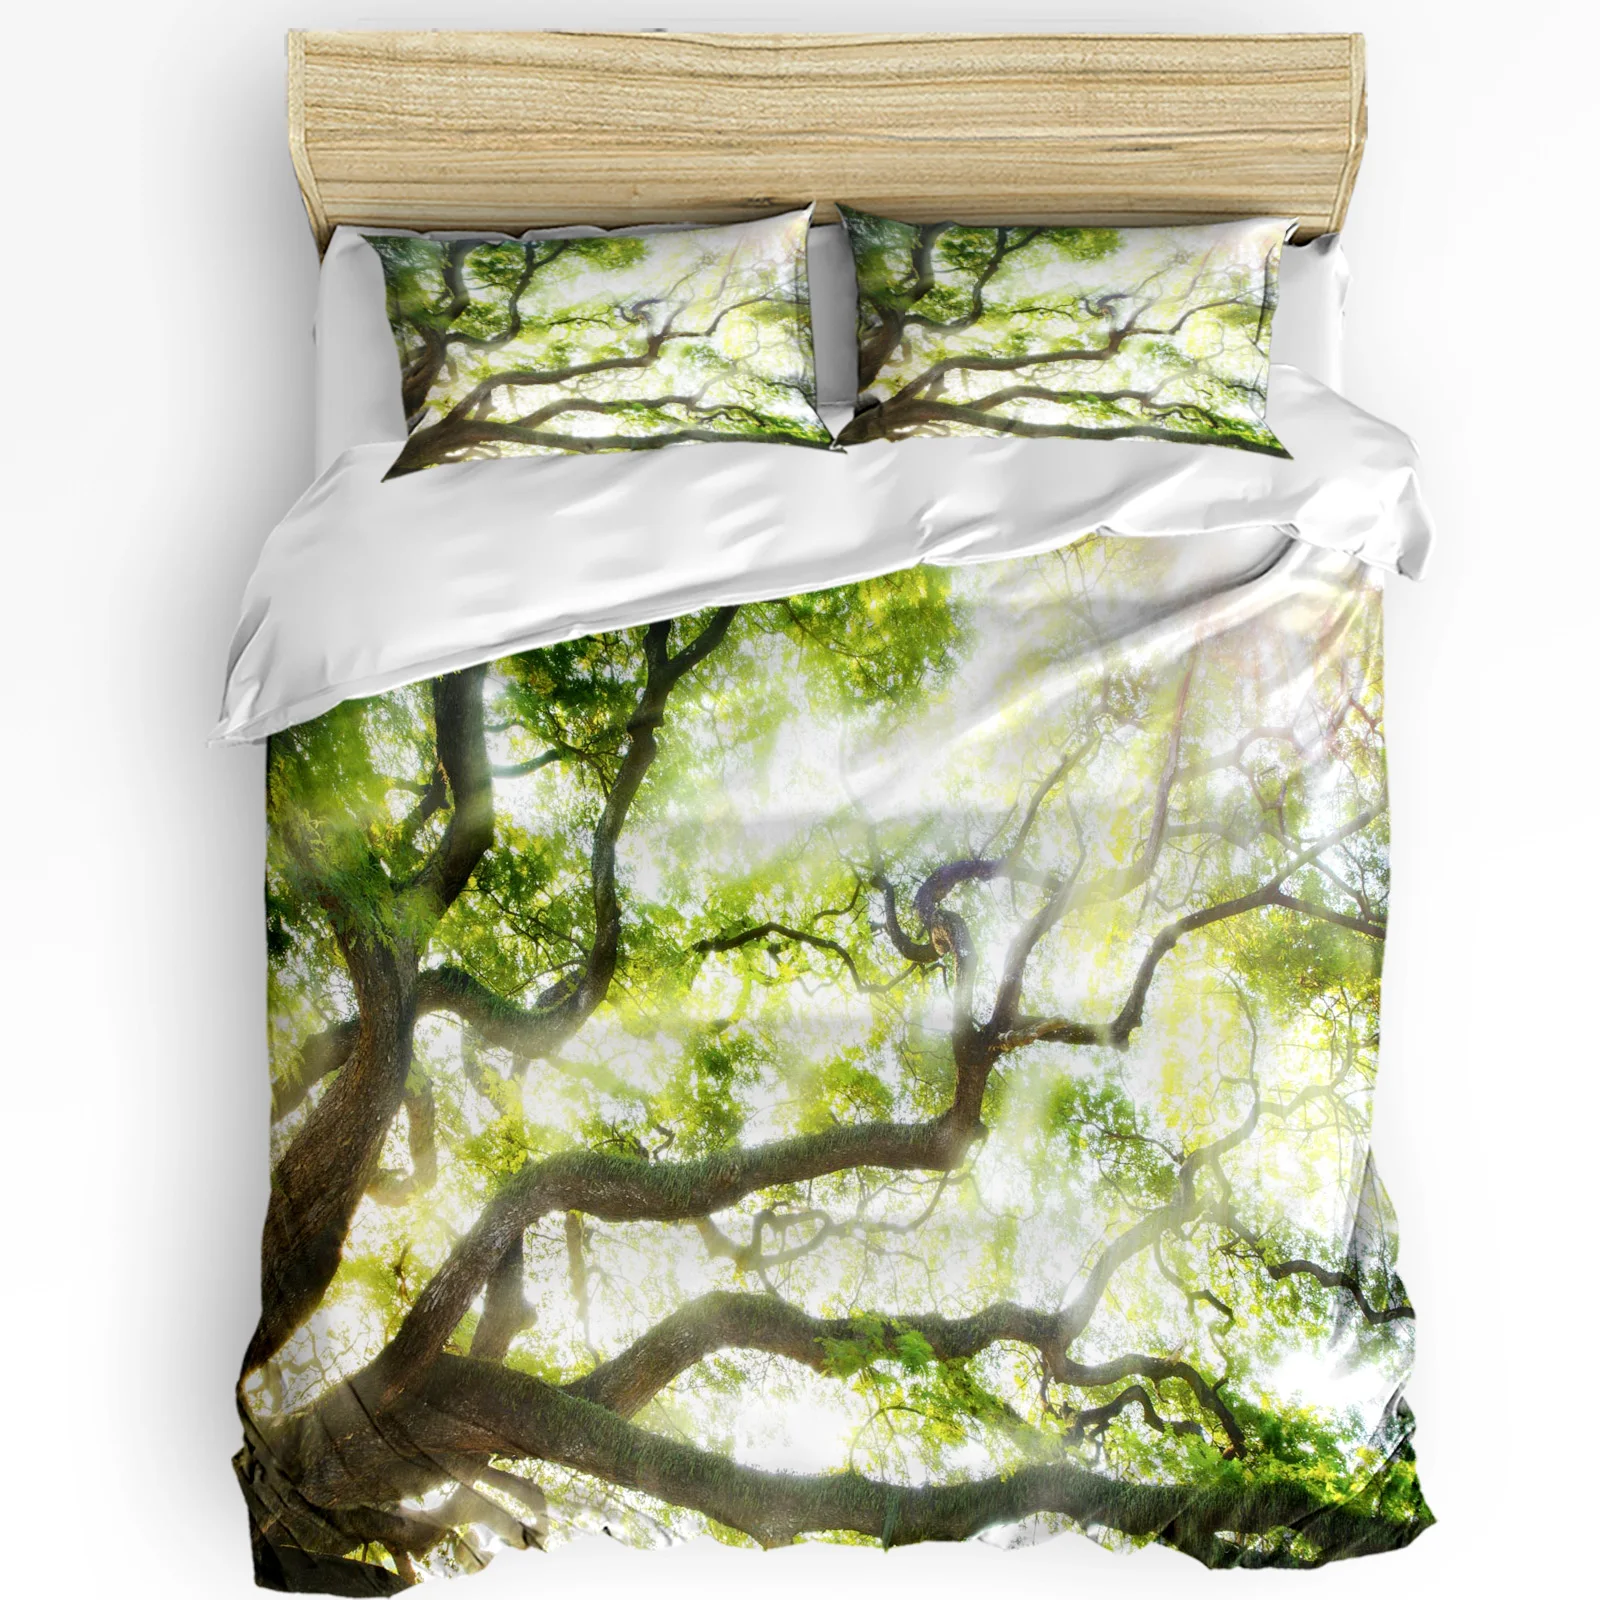 

Trees Branches Sunshine Scenery Duvet Cover Bed Bedding Set Home Textile Quilt Cover Pillowcases Bedroom Bedding Set No Sheet